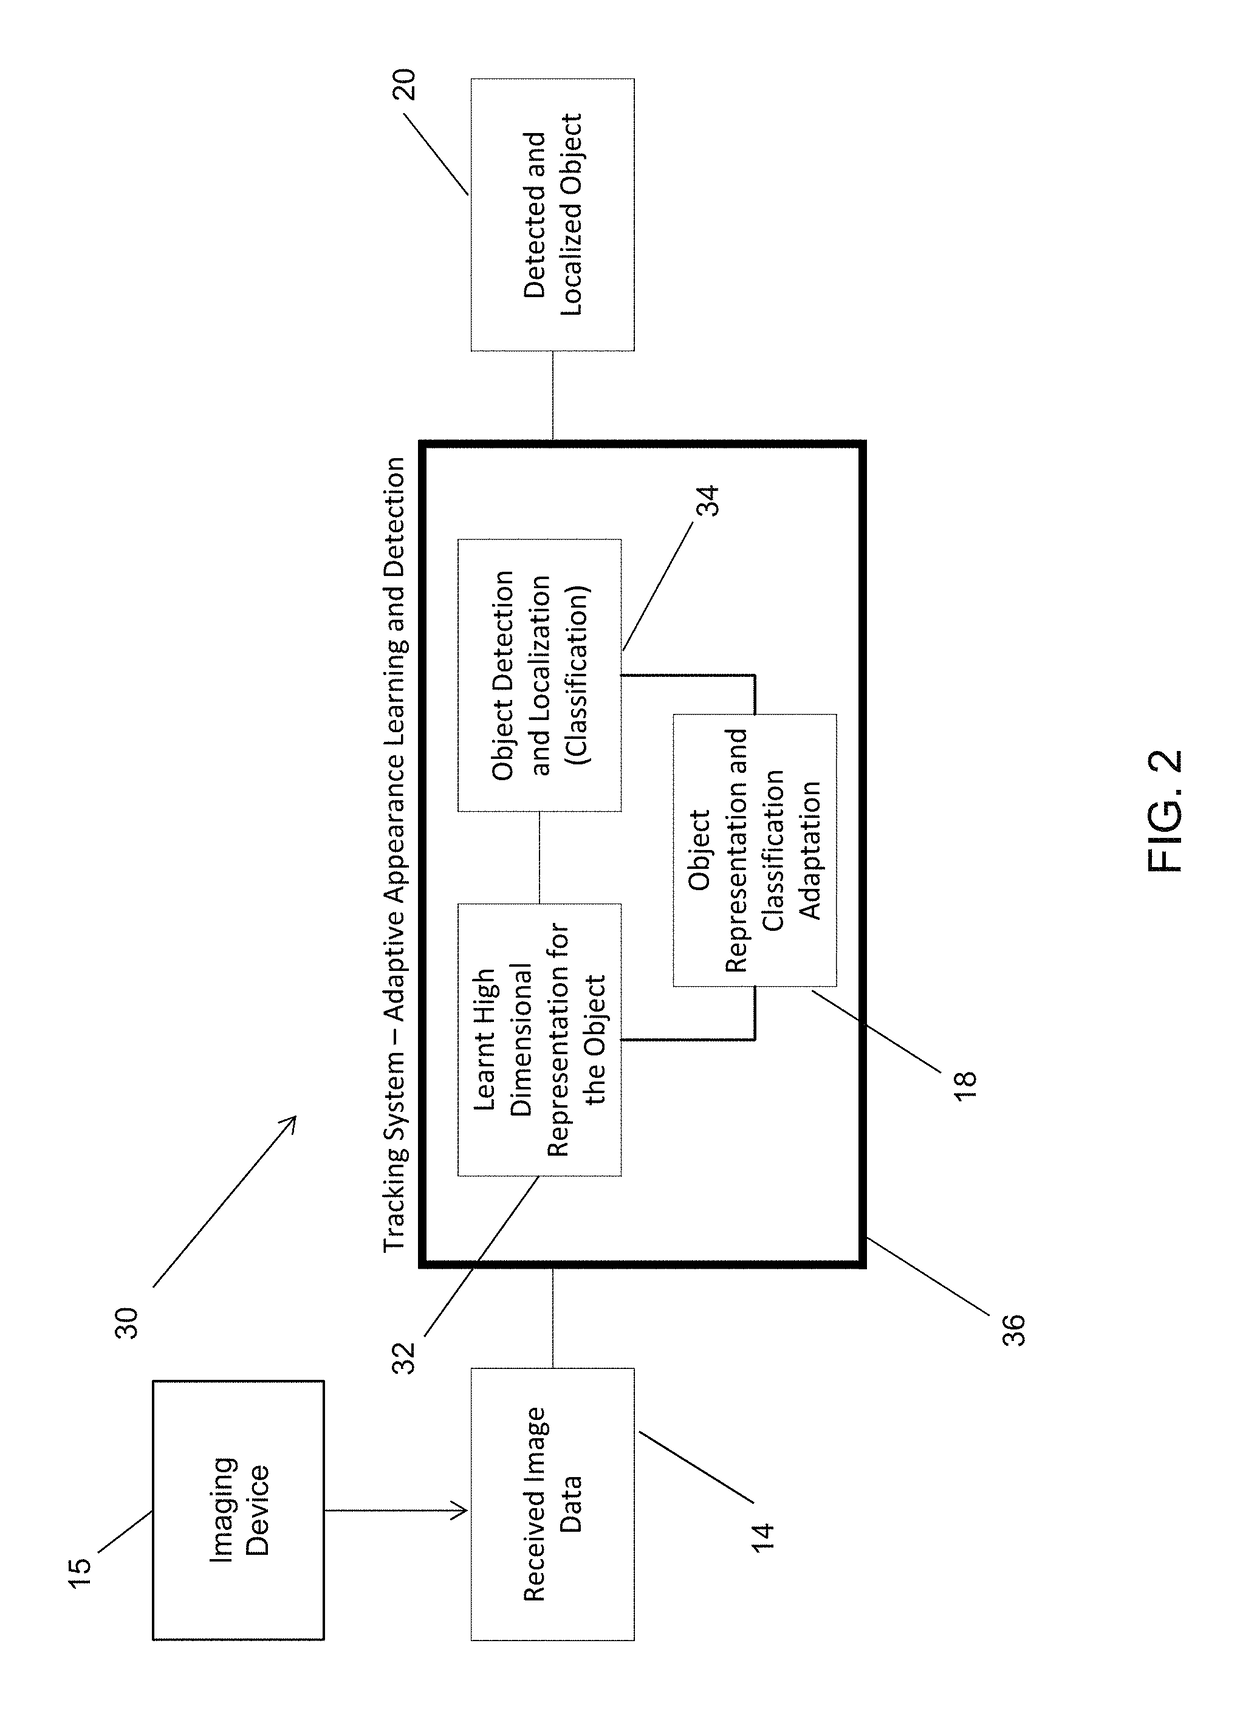 Systems and Methods for Object Tracking and Localization in Videos with Adaptive Image Representation